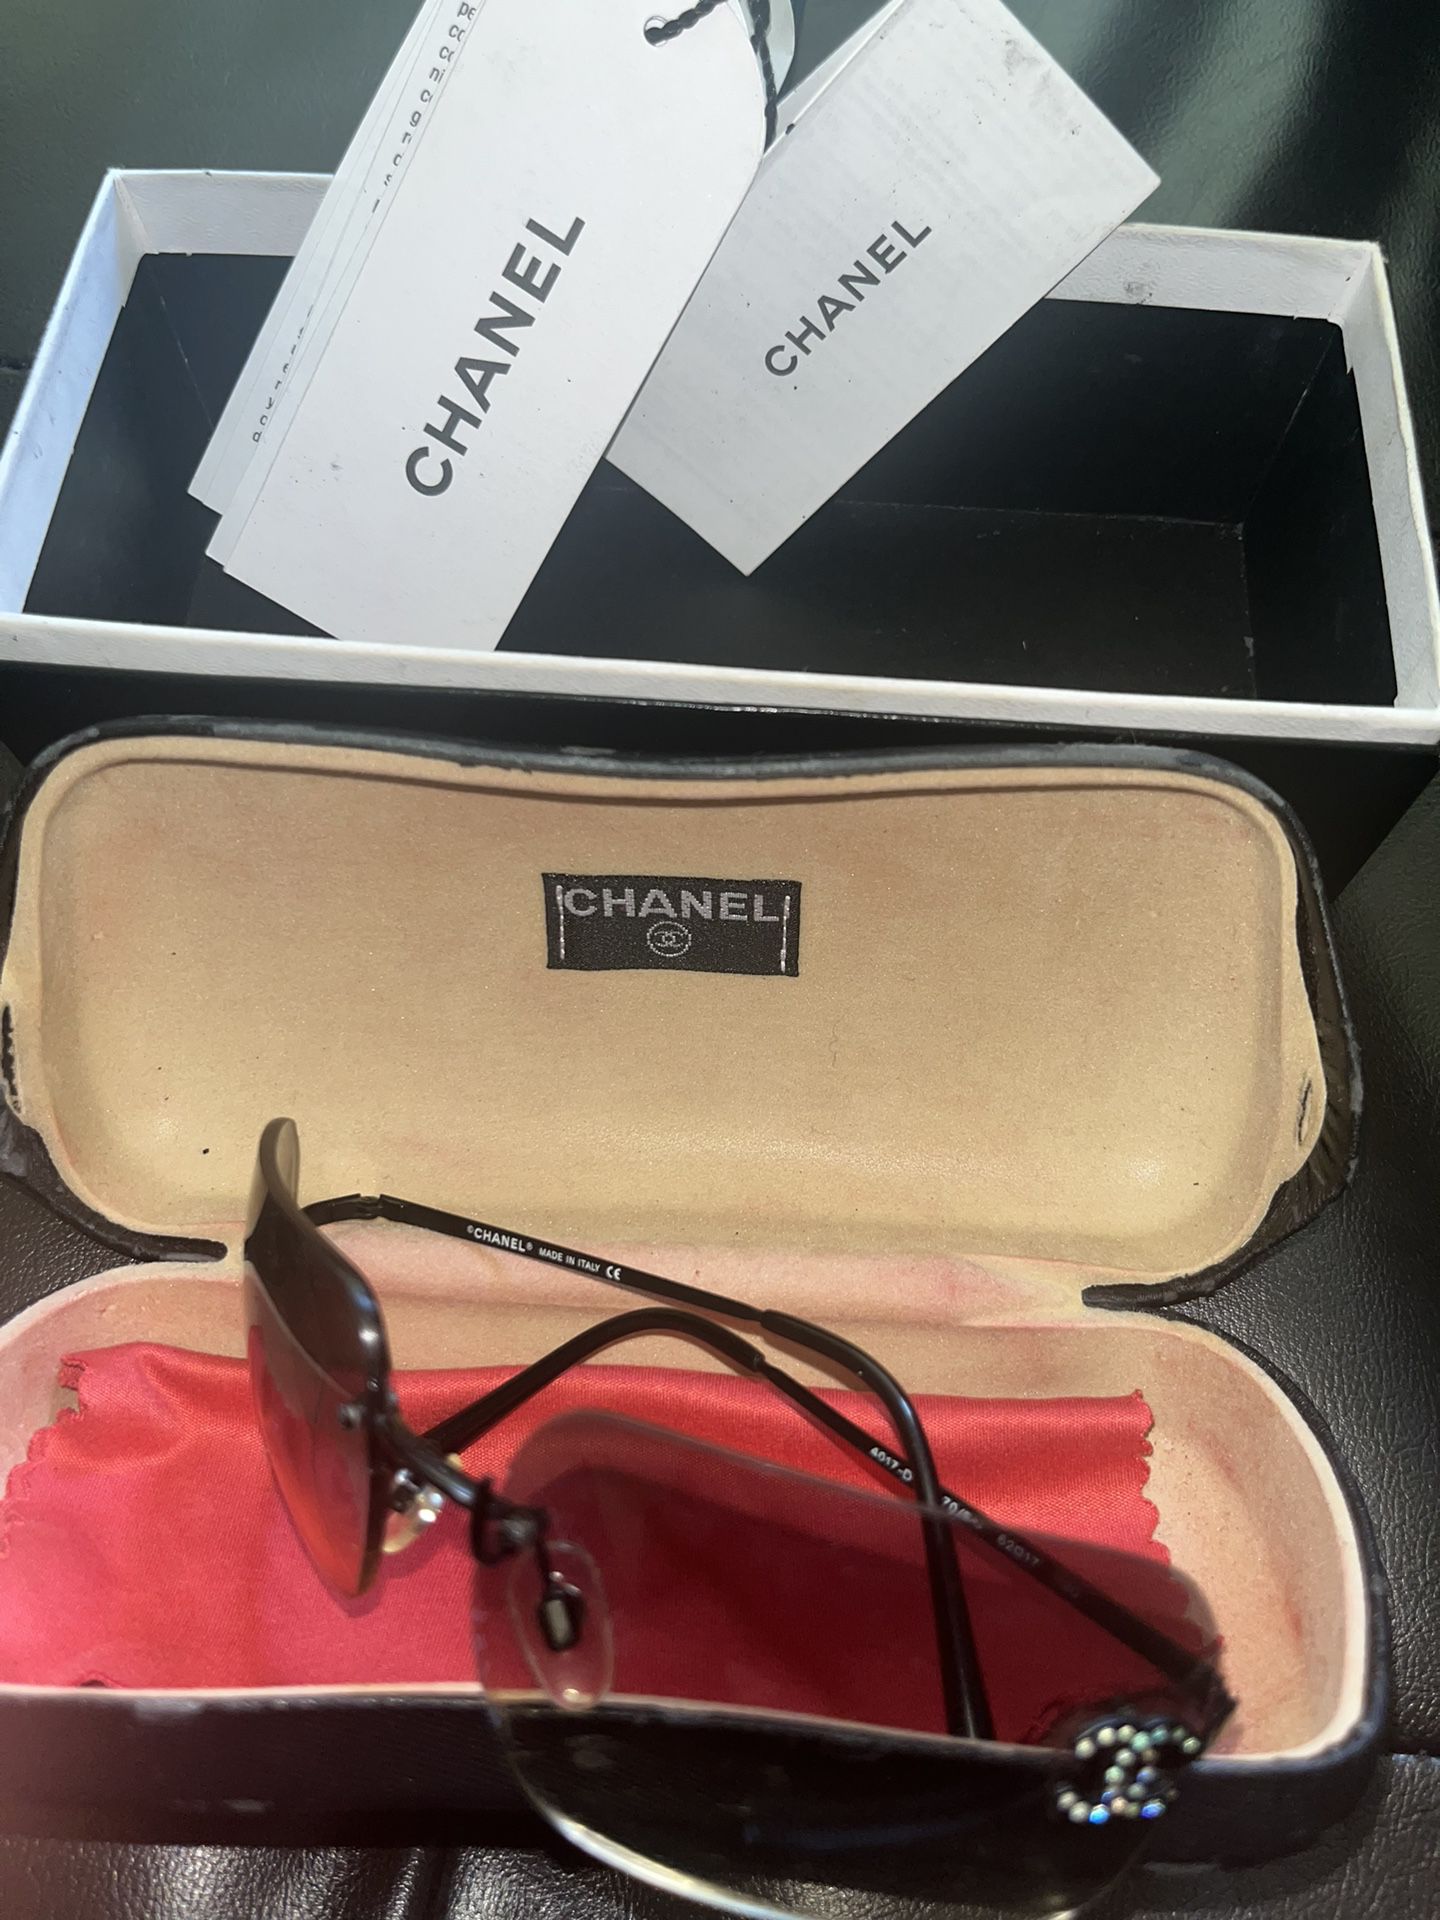 Vintage Chanel Sunglasses for Sale in West Allis, WI - OfferUp